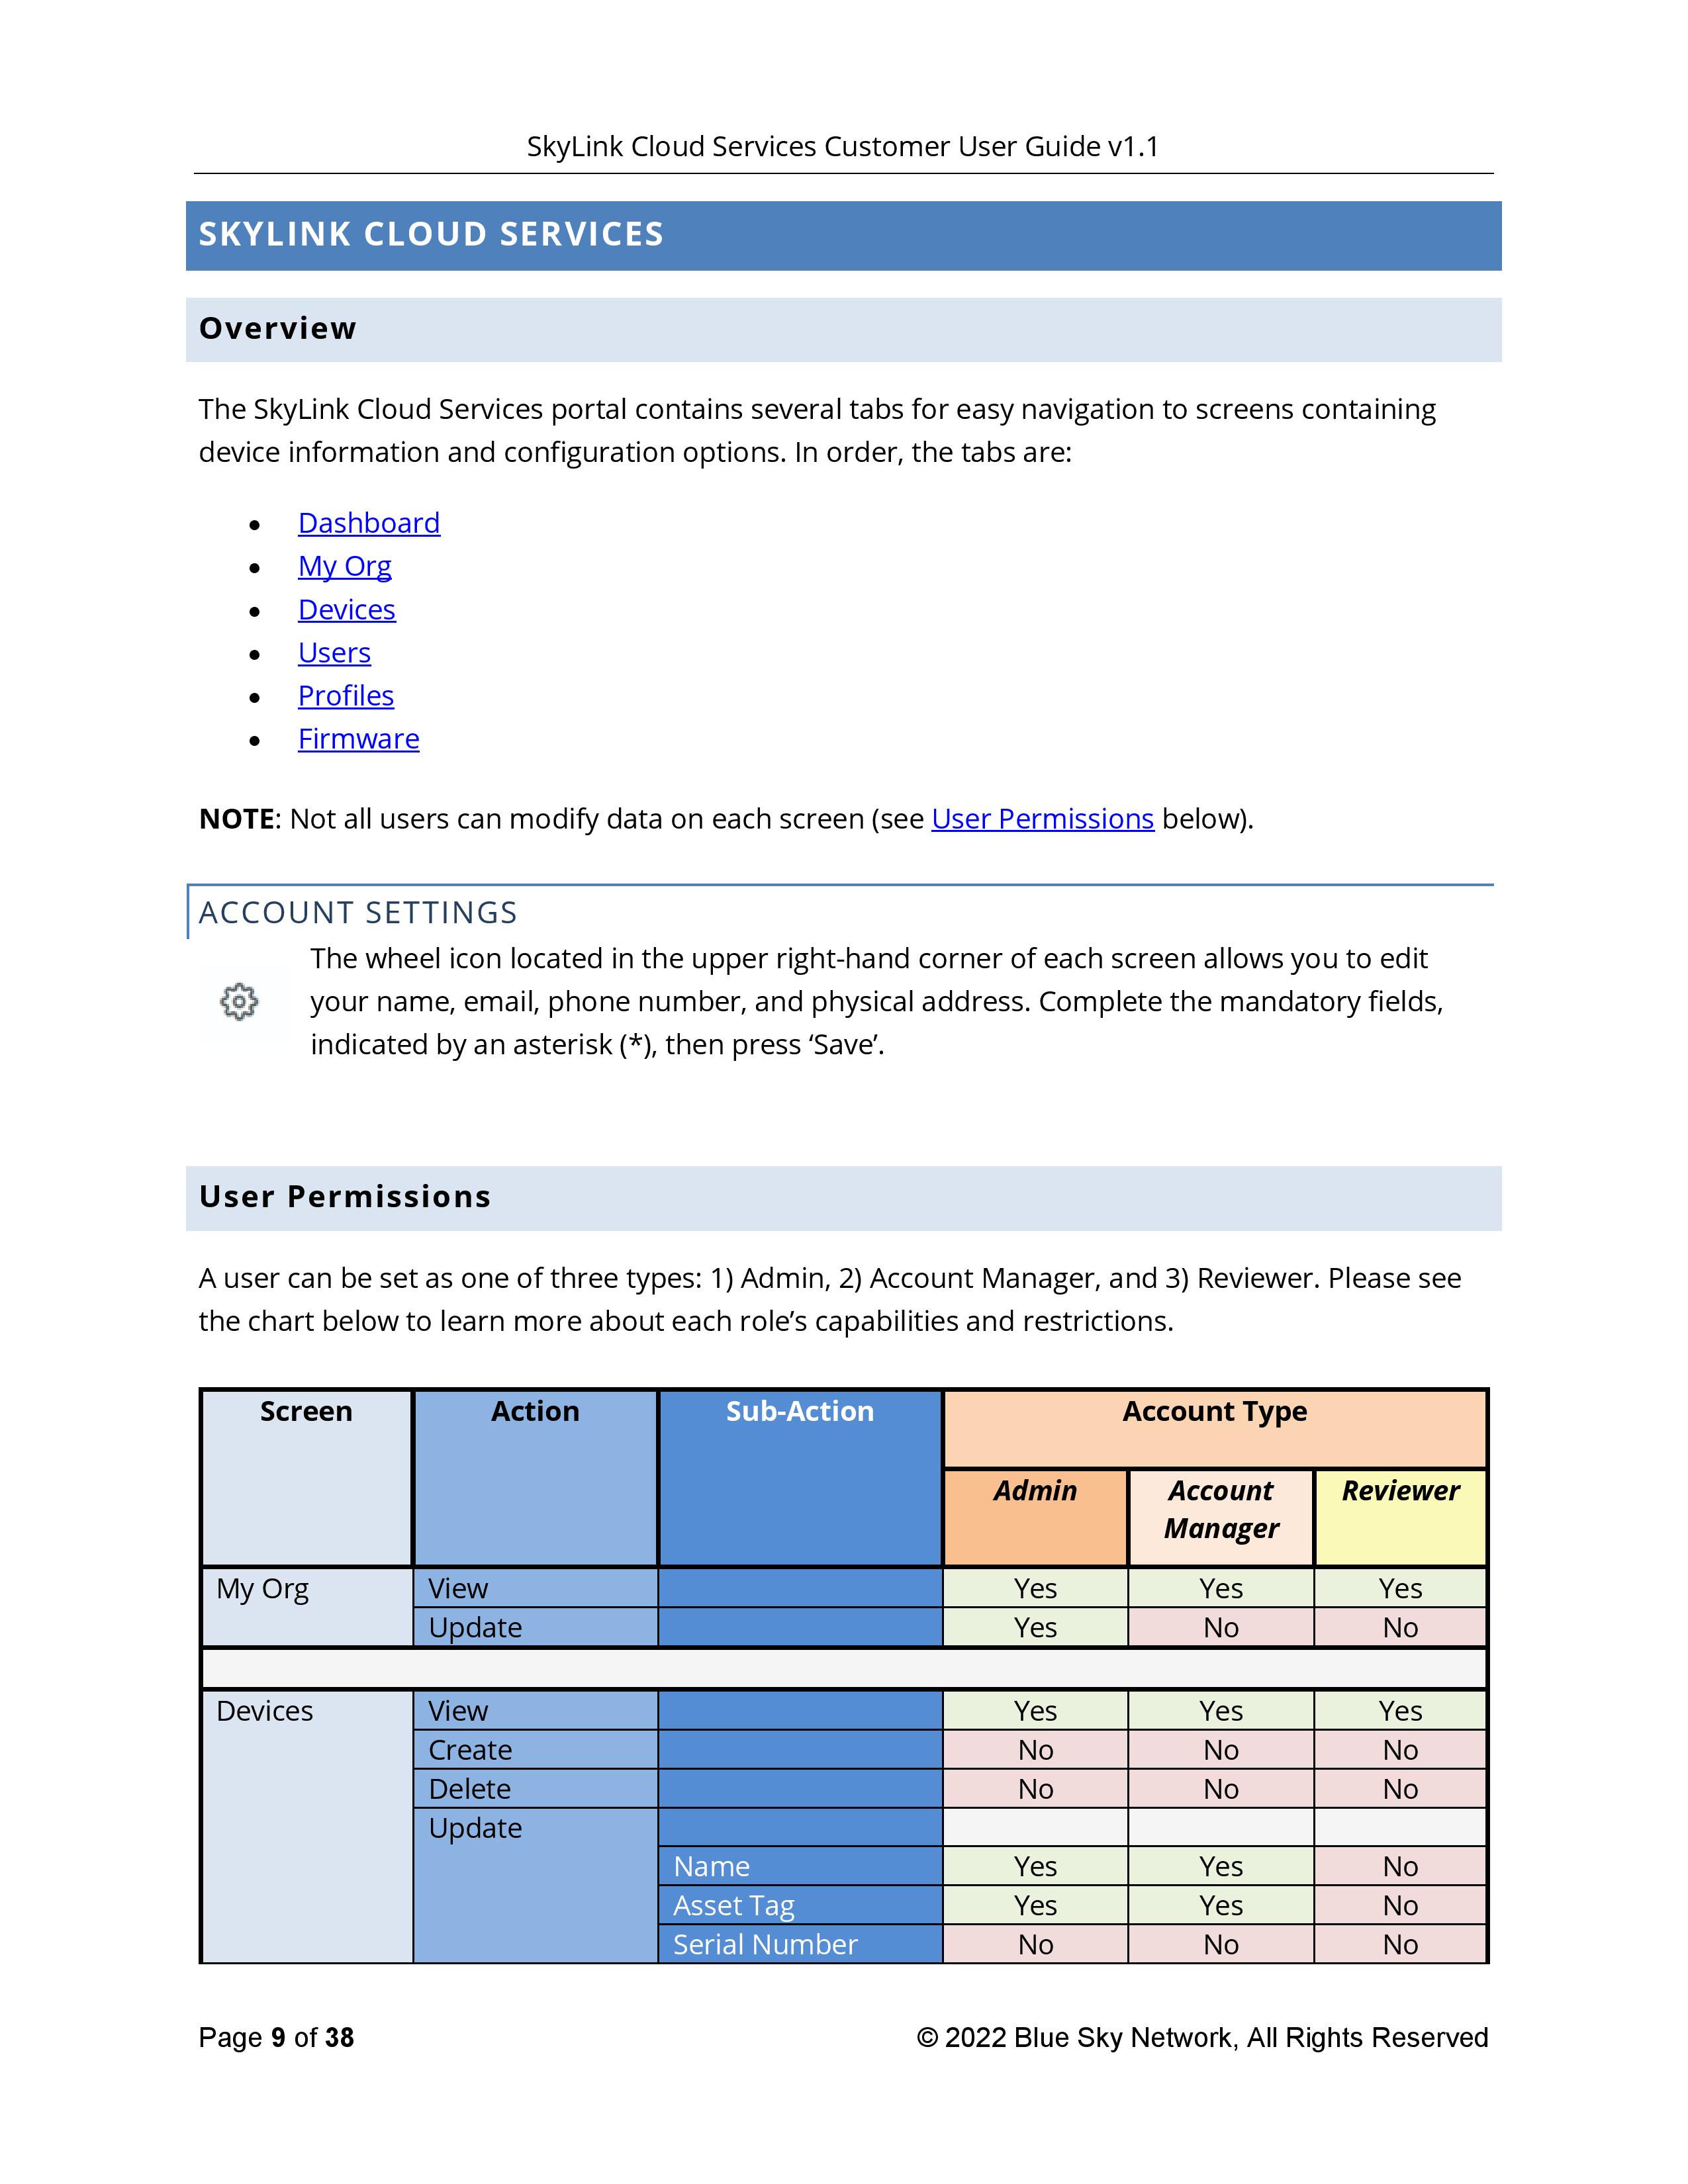 SkyLink-Cloud-Services-Customer-User-Guide-page-009.jpg